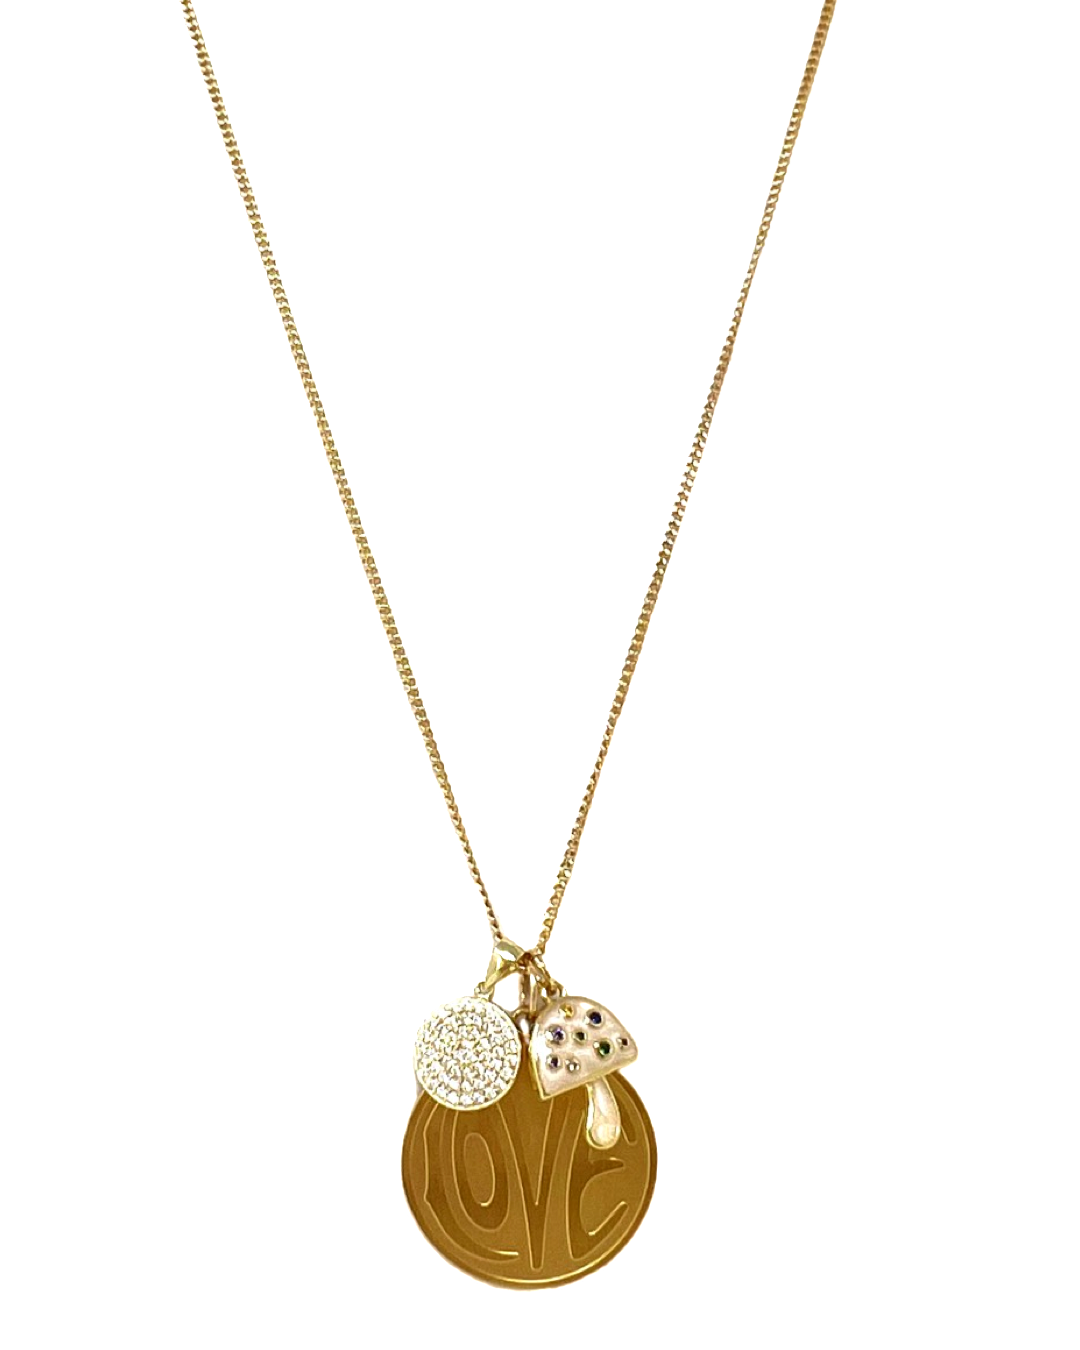 Shroom Love Charm Necklace in Gold